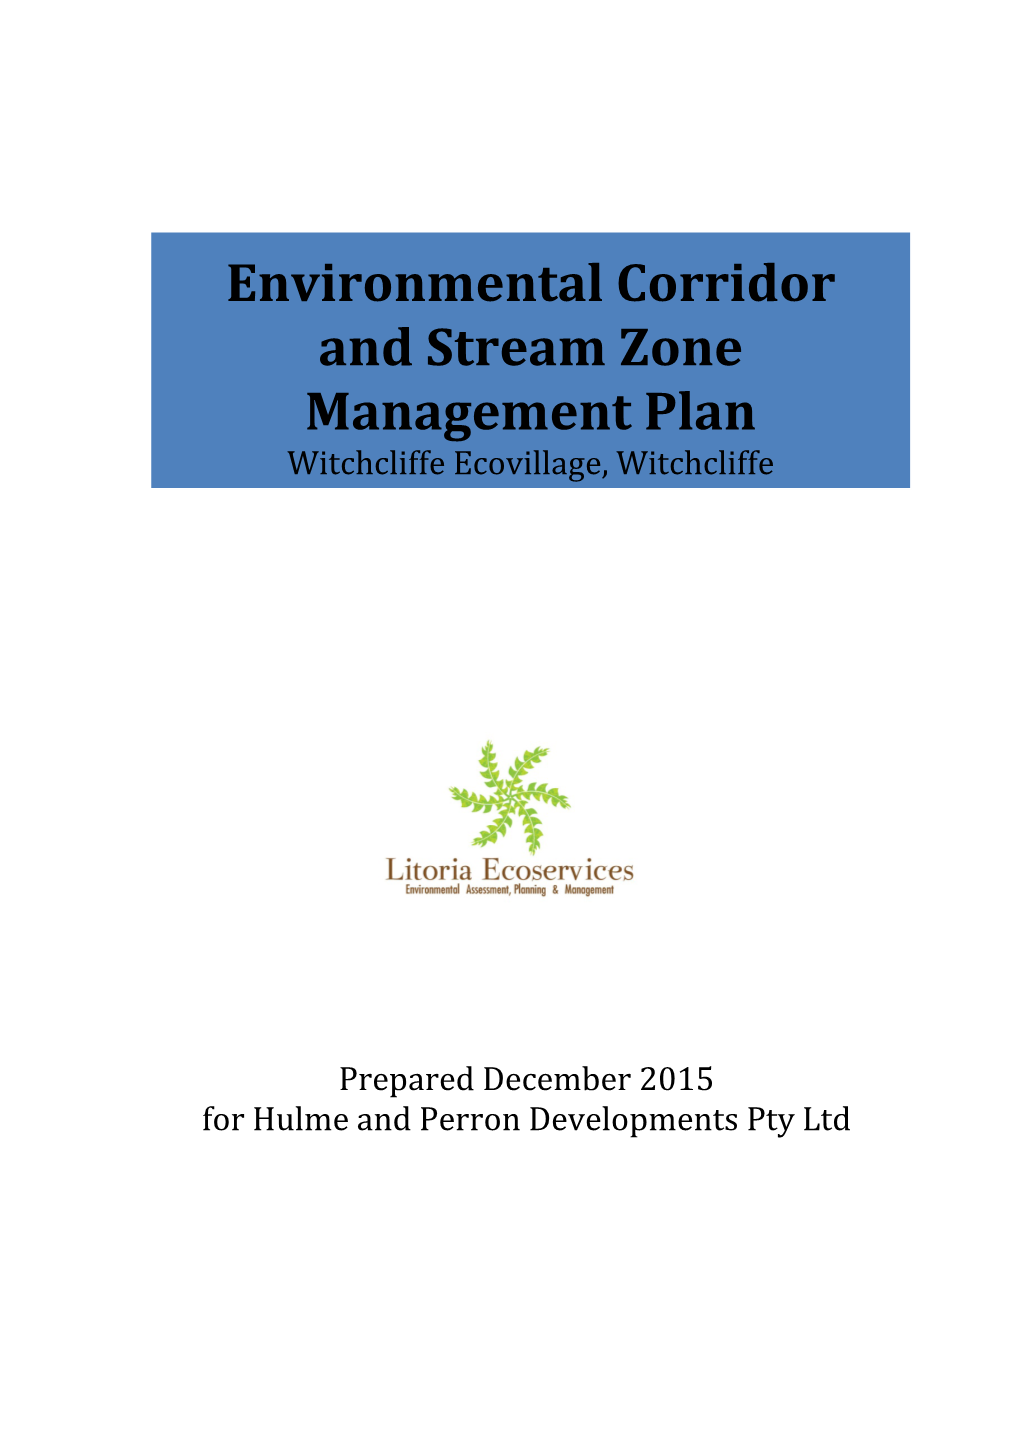 Environmental Corridor and Stream Zone Management Plan Witchcliffe Ecovillage, December 2015